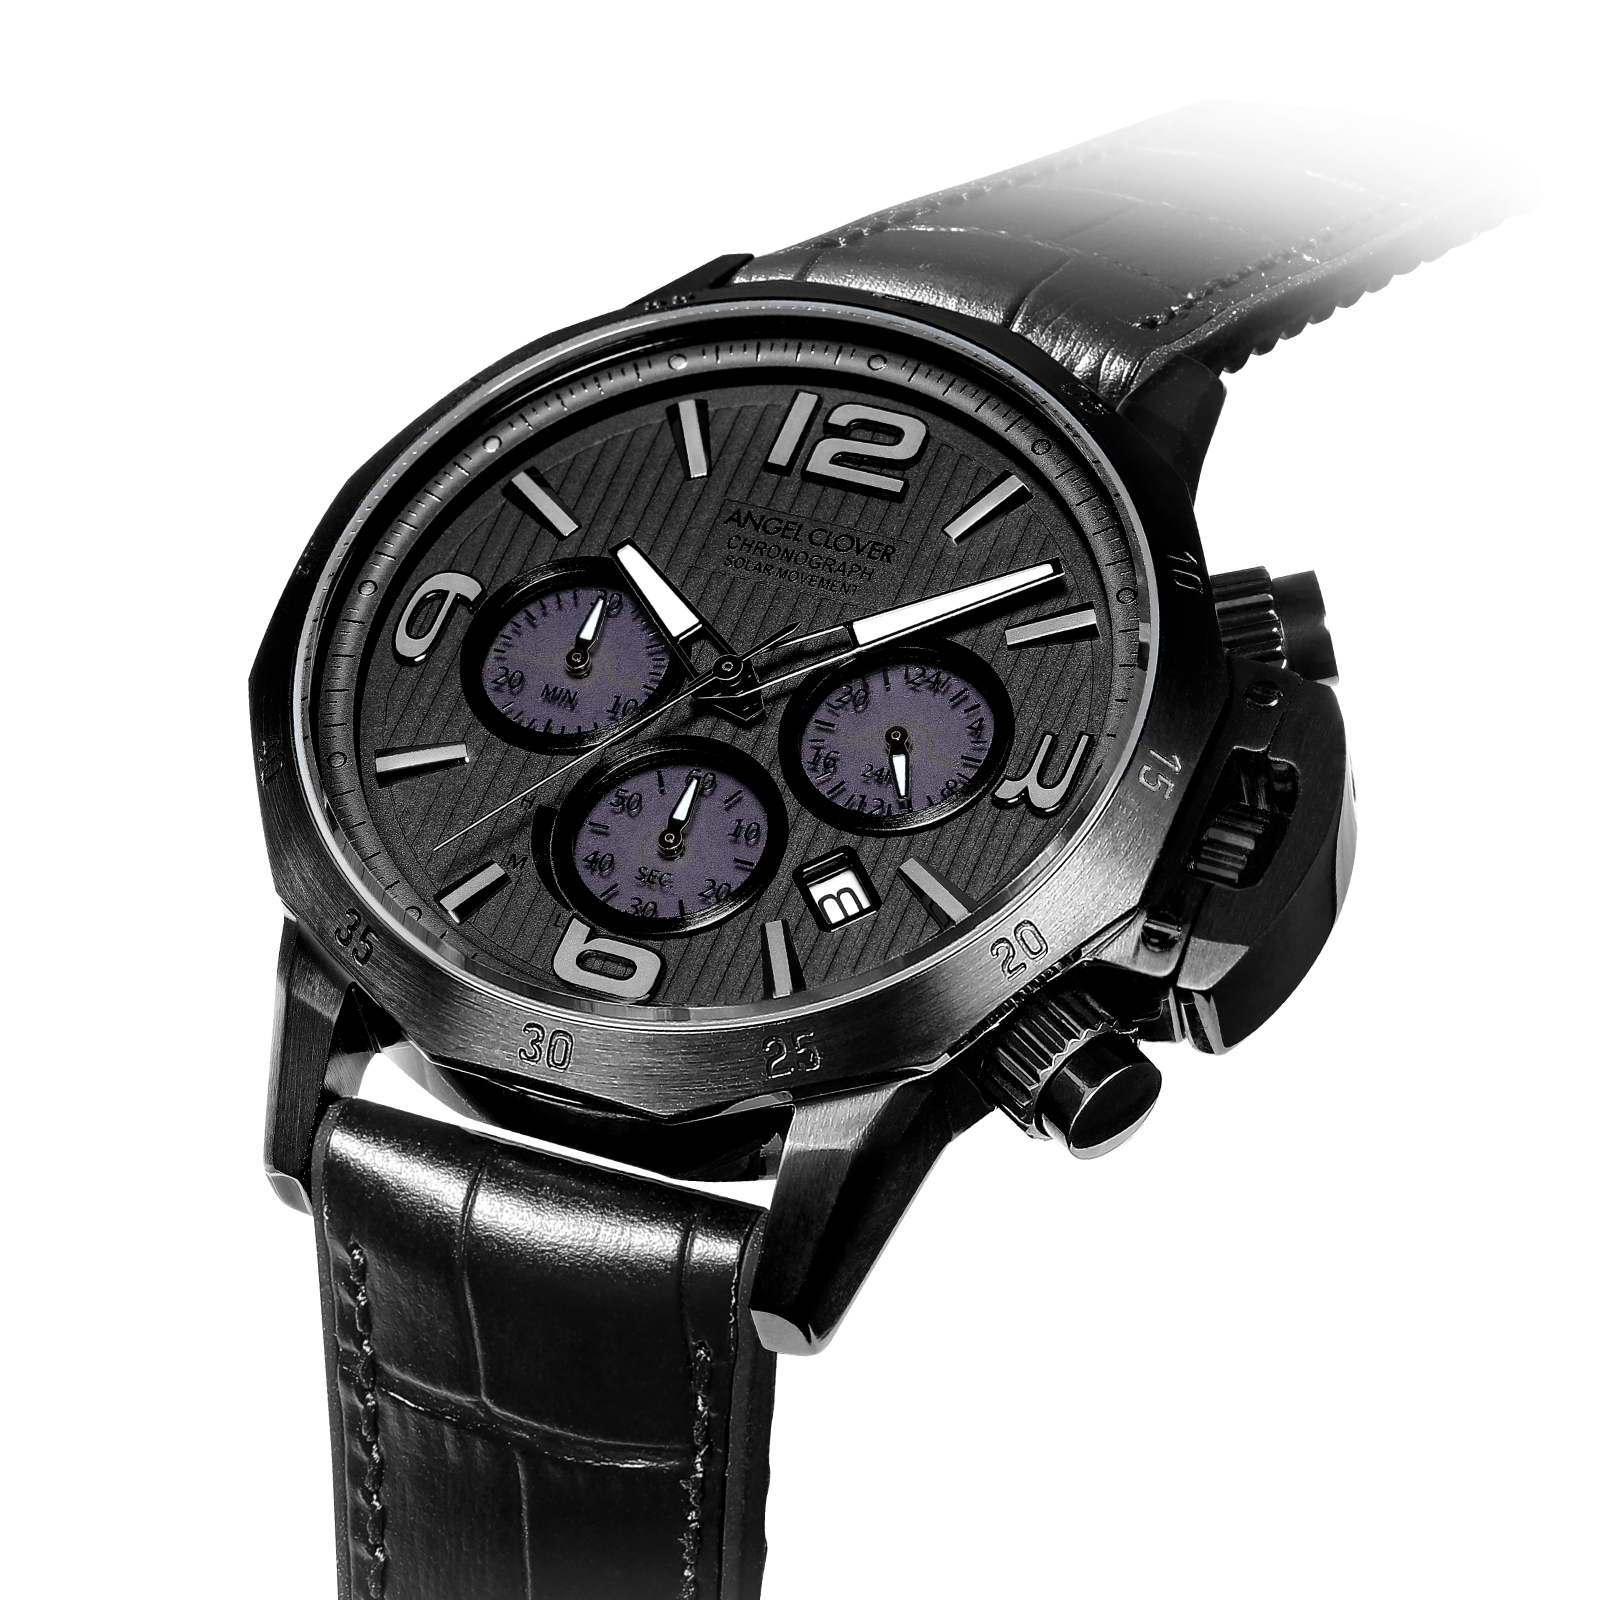 TIME CRAFT SOLAR ALL BLACK ONTIME u0026 MOVE LIMITED EDITION | エンジェルクローバー |  Angel Clover